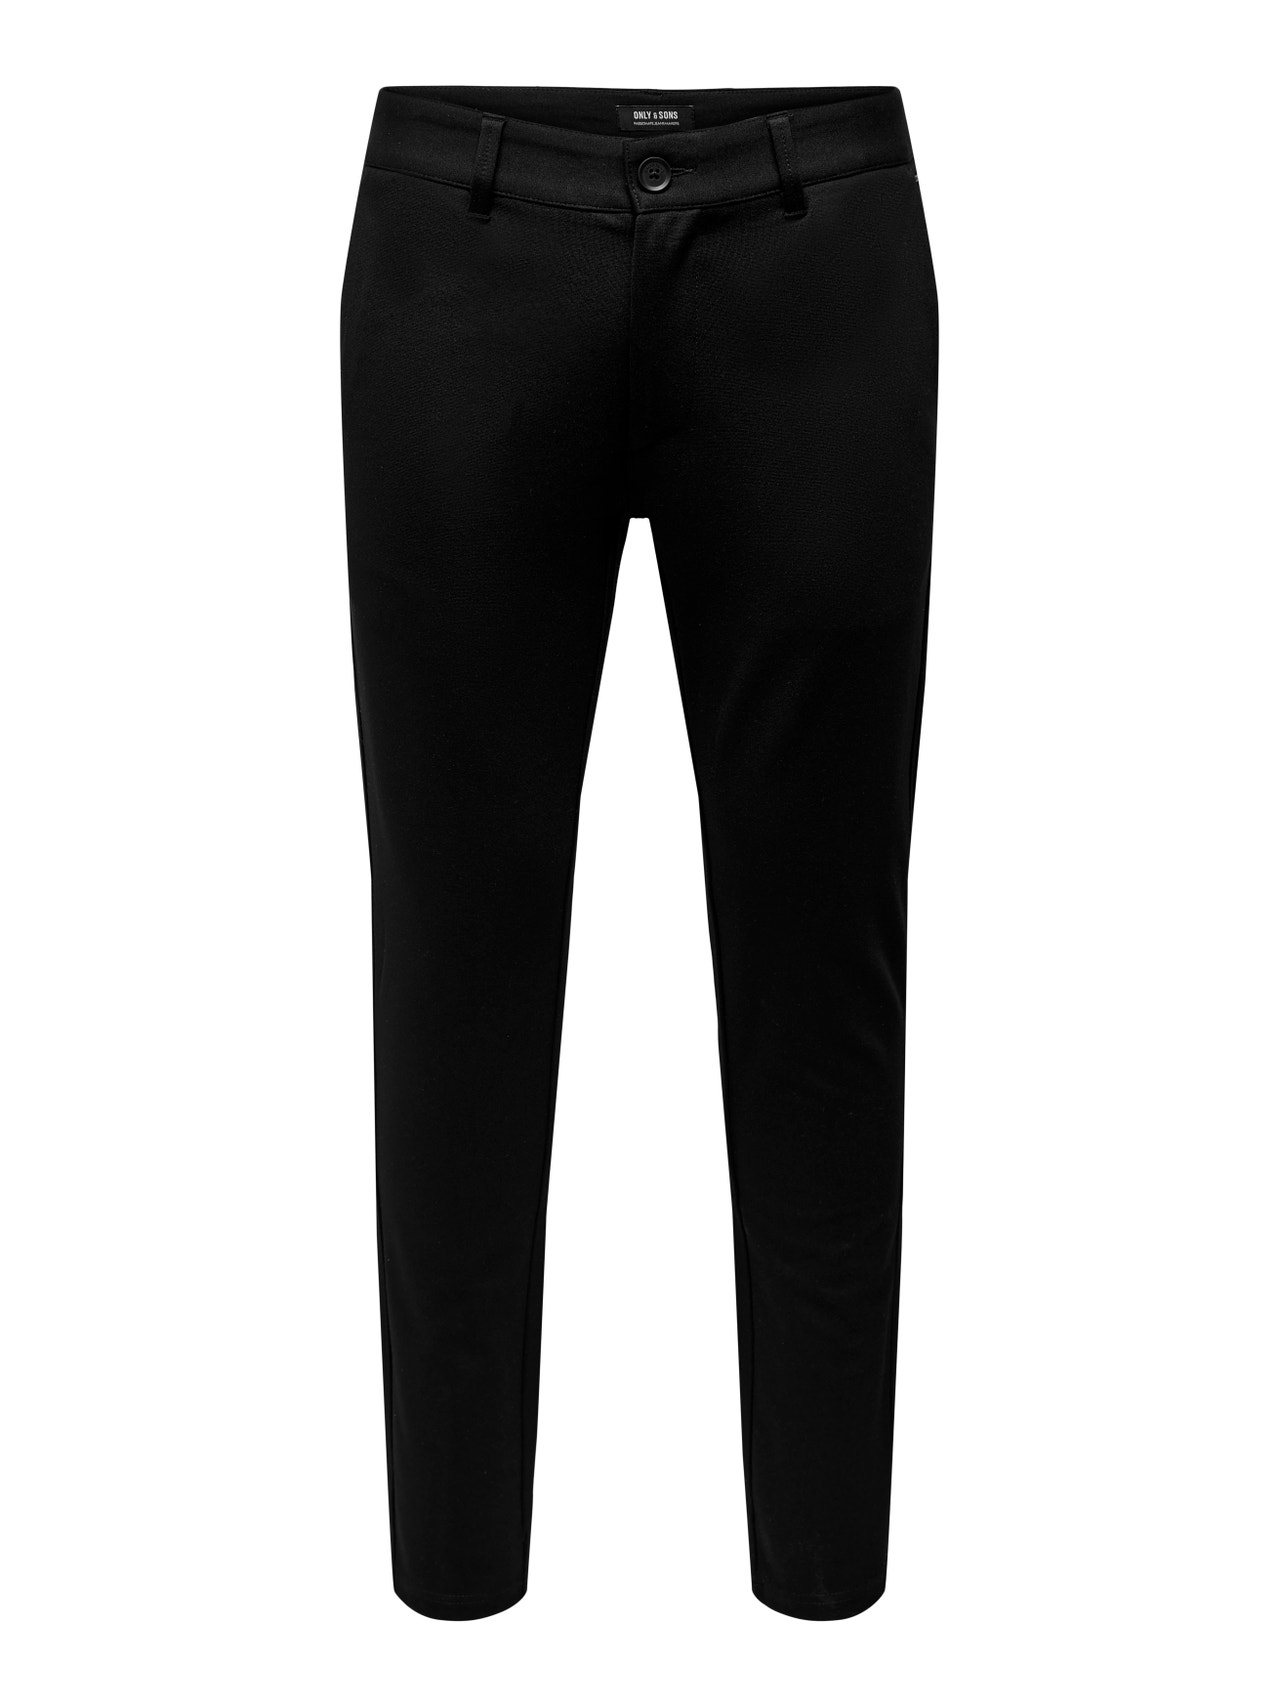 ONLY & SONS Classic chino trousers -Black - 22025747